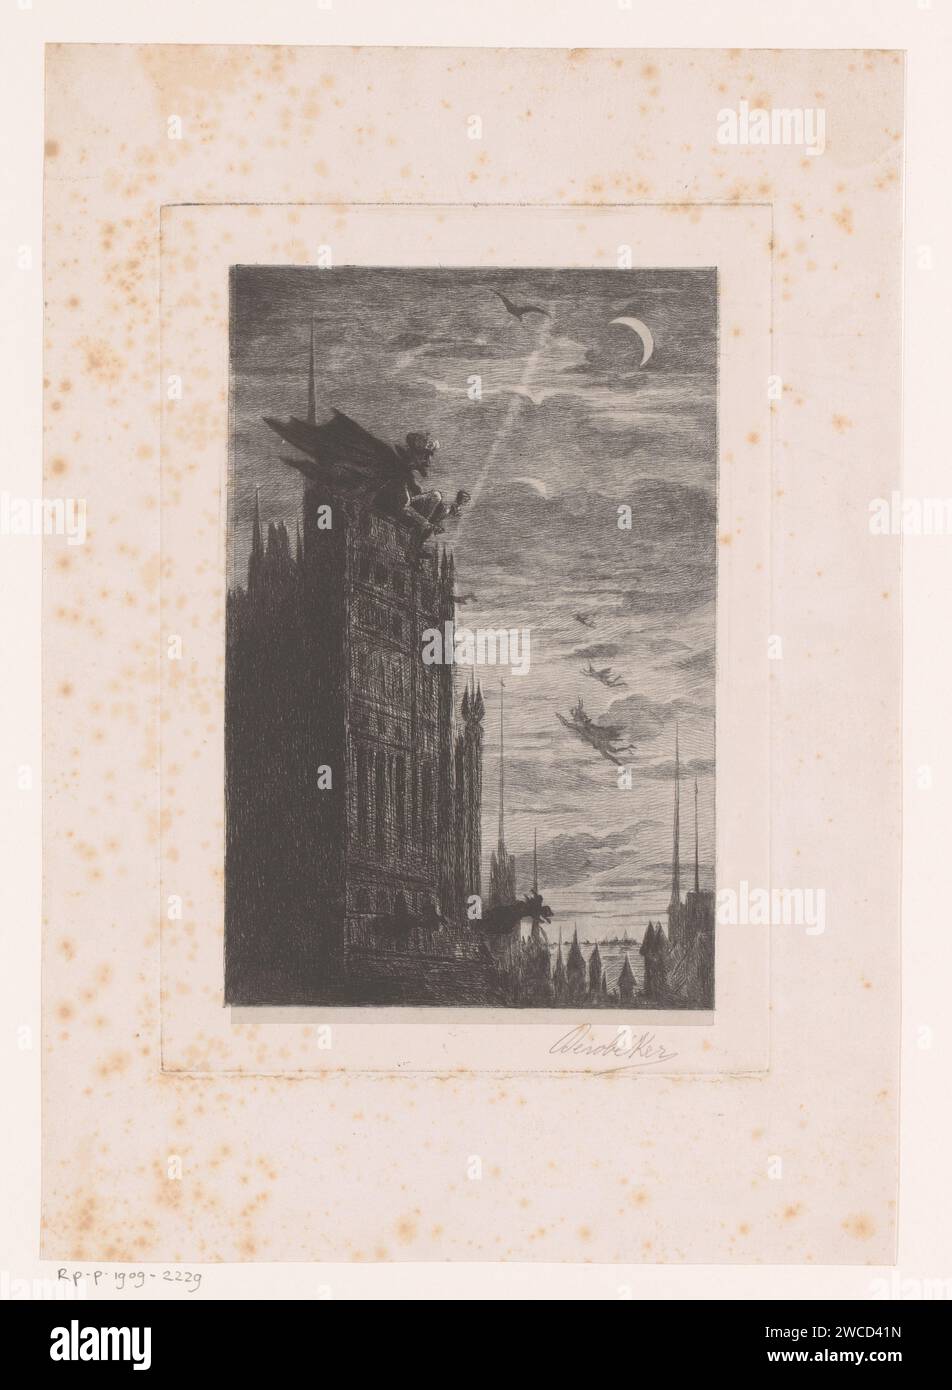 Night face with church tower and devils, Léon Becker, 1869 print  Paris paper. etching devil(s) and demons. parts of church exterior and annexes Stock Photo